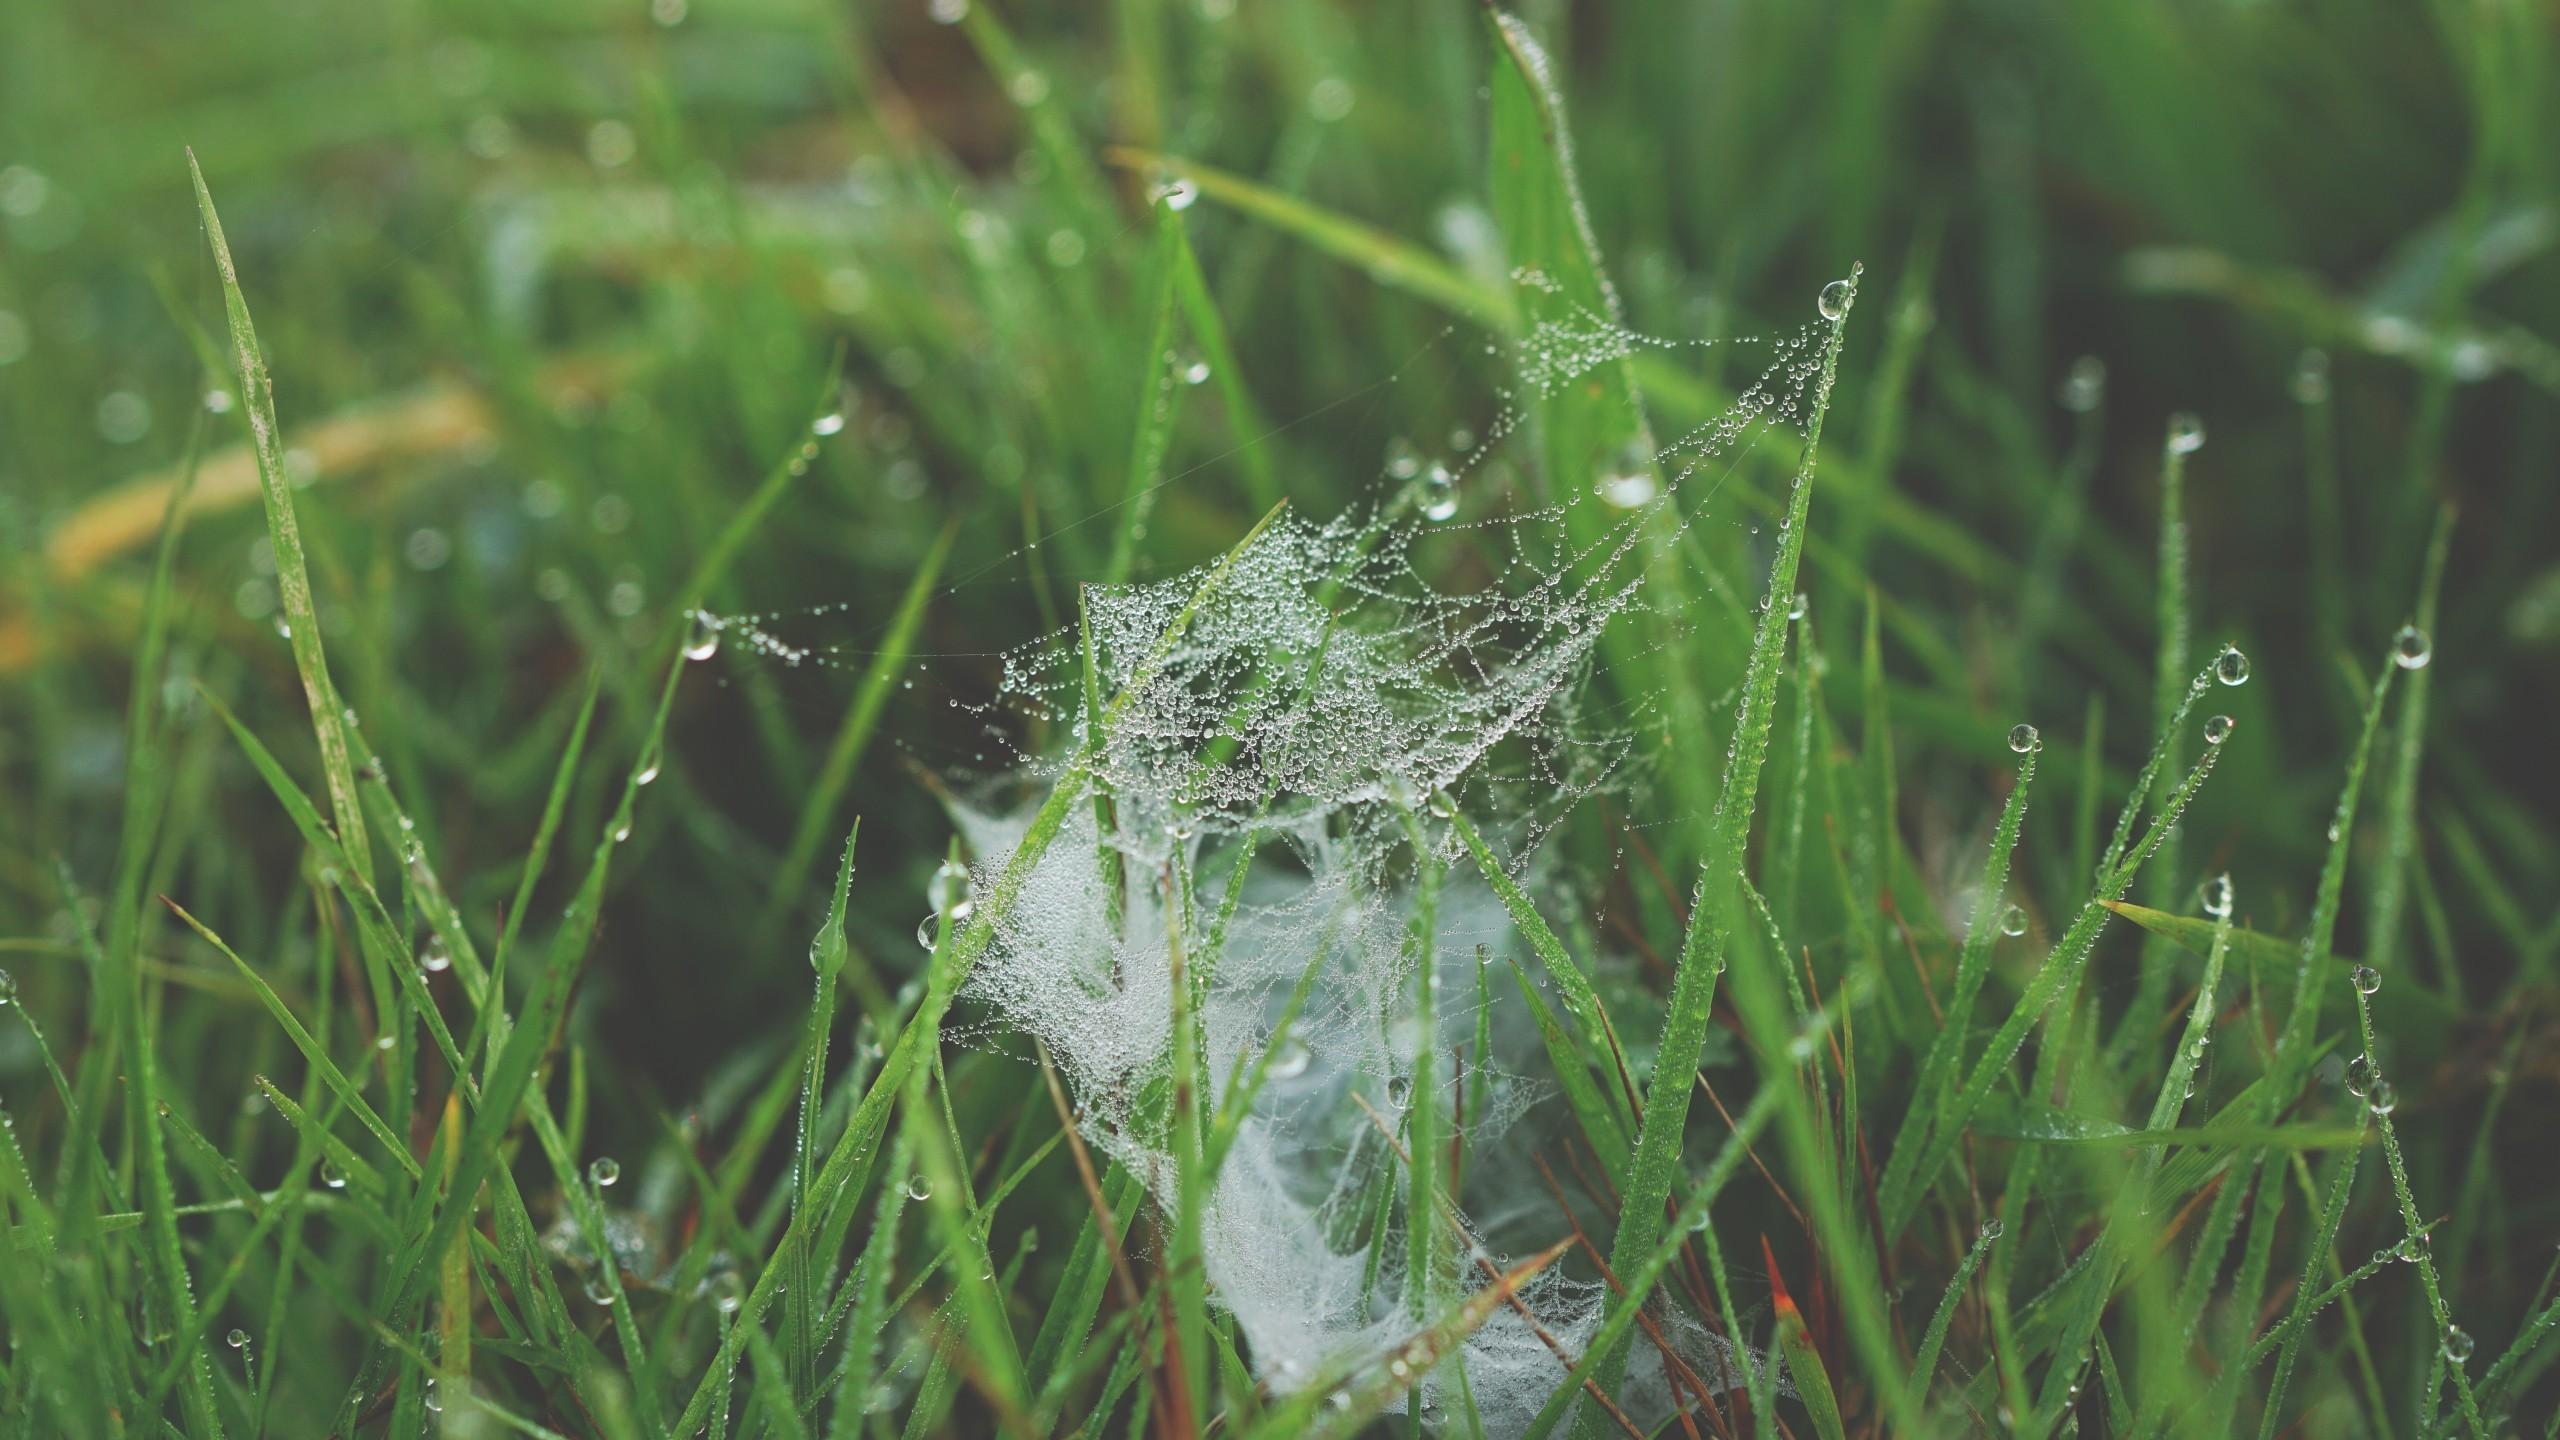 Download 2560x1440 Web, Grass, Dew Wallpaper for iMac 27 inch